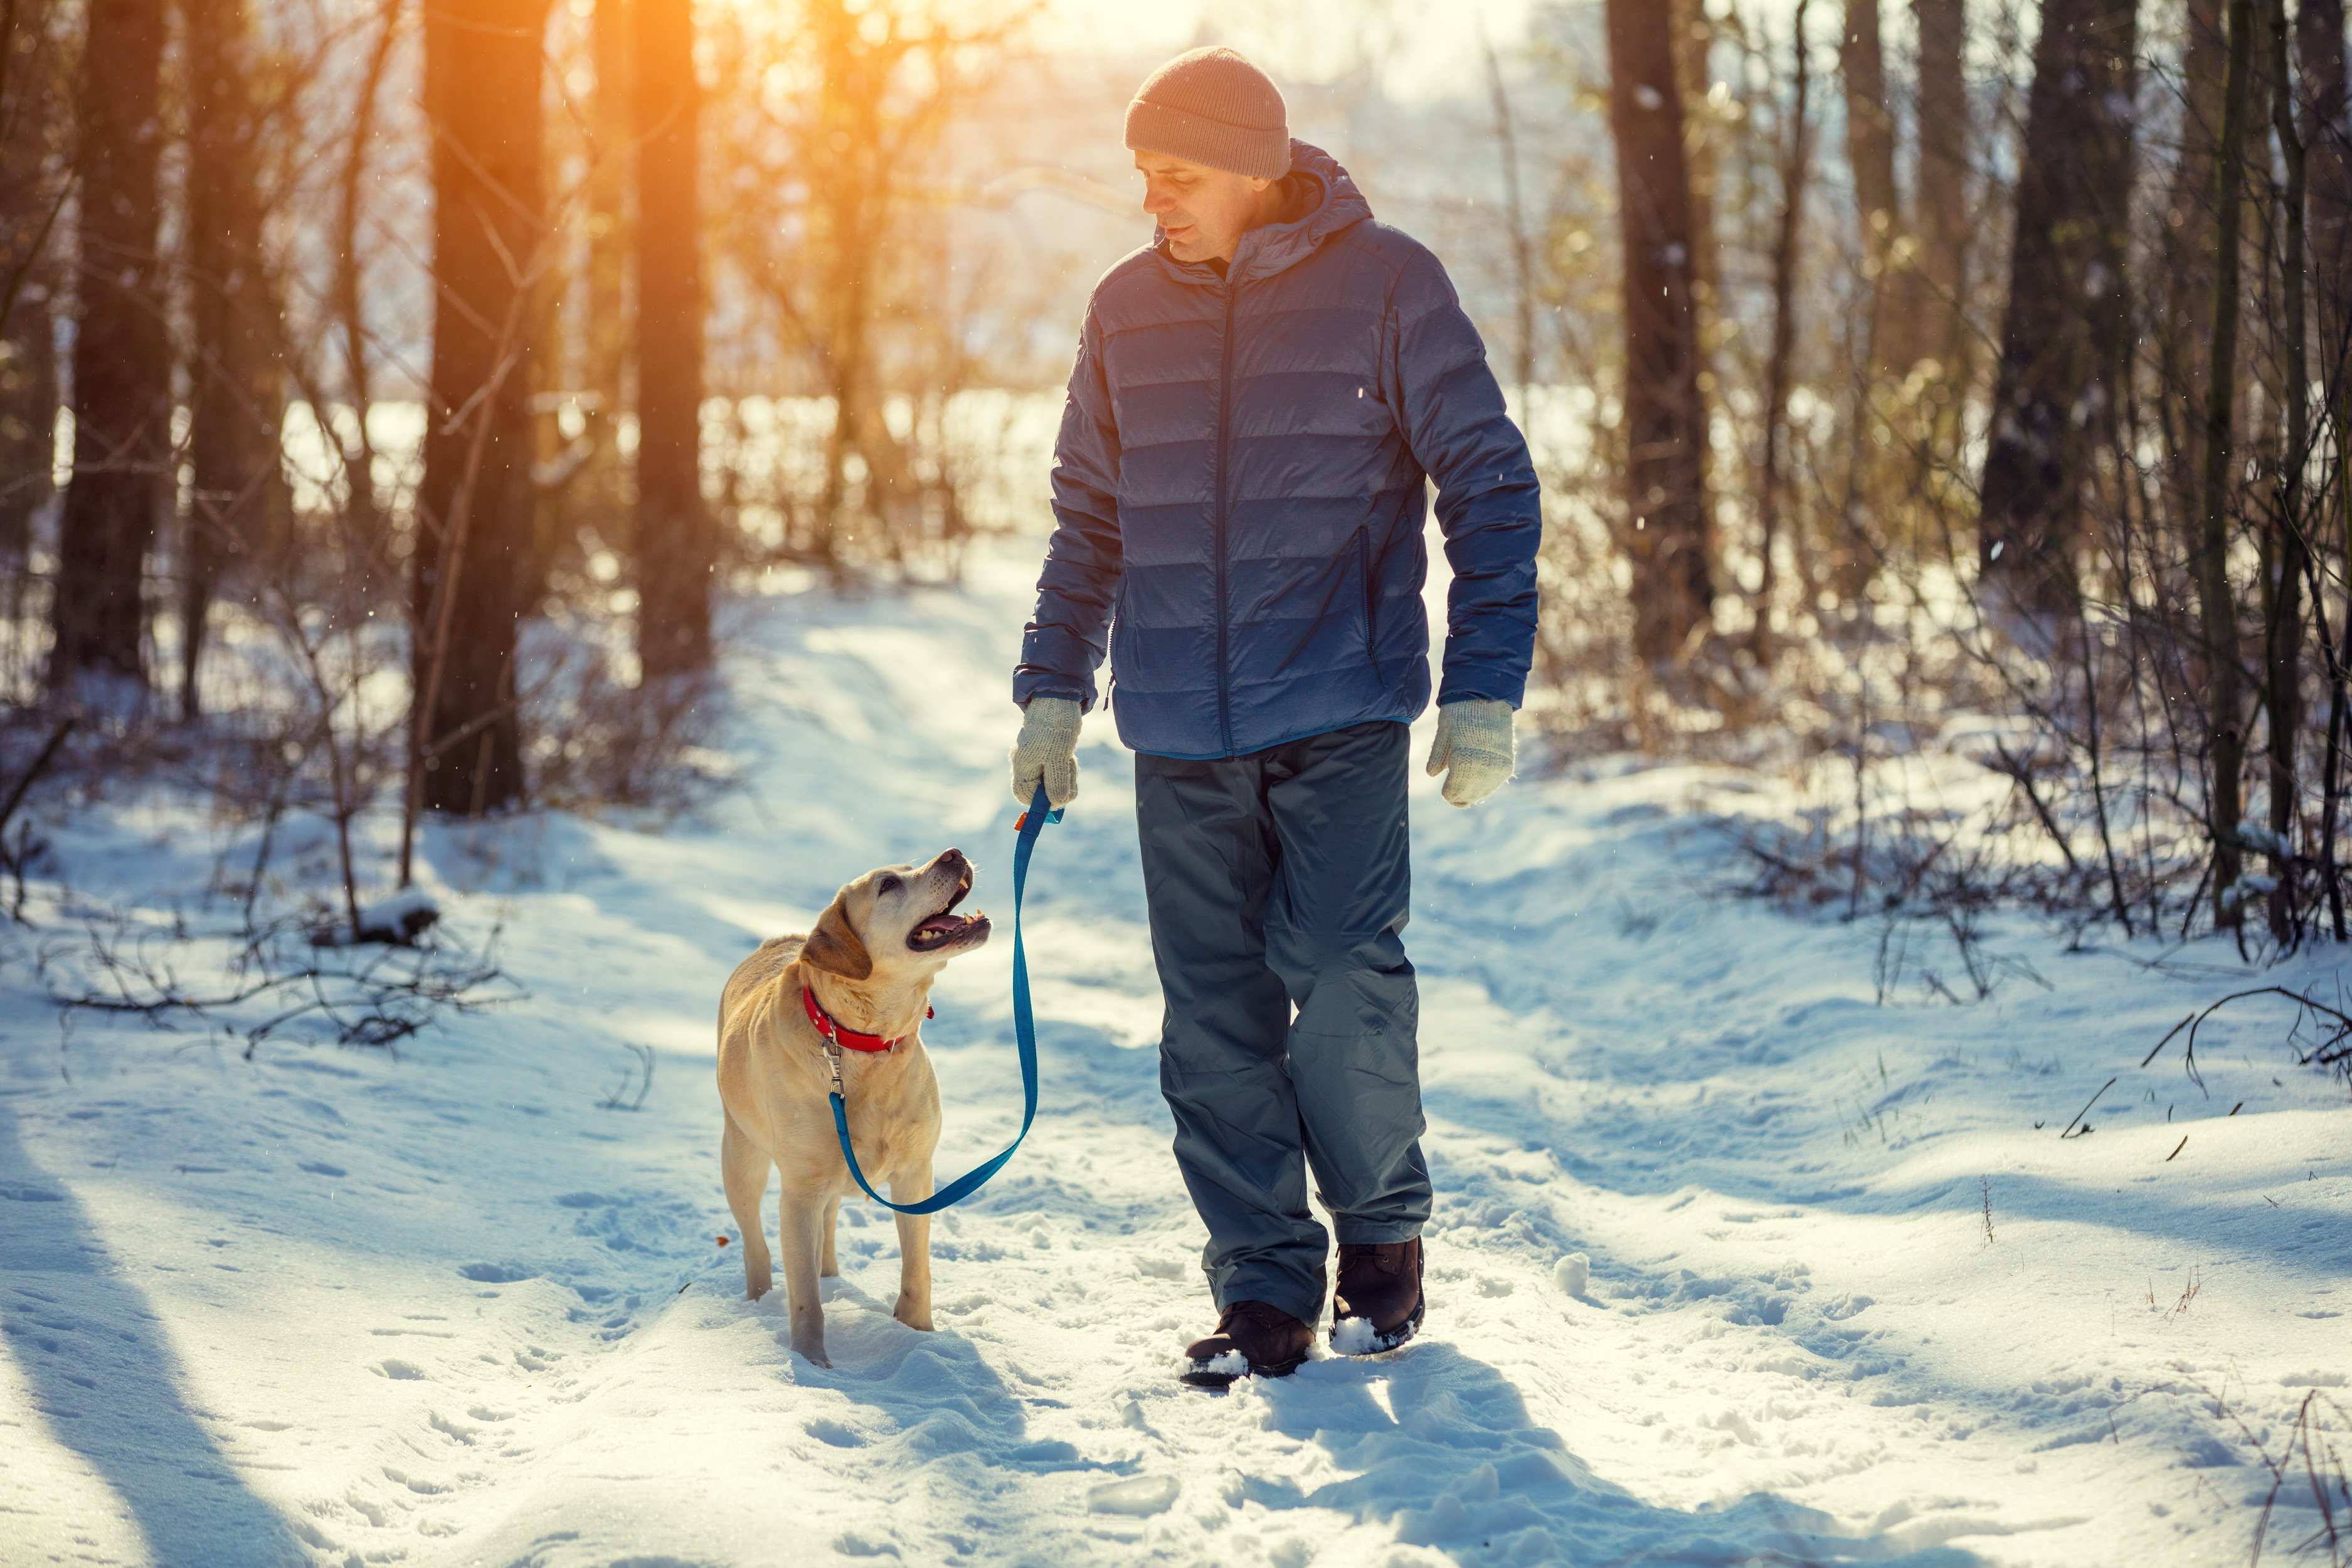 Now that Dan spends little time managing his care, he can enjoy an early morning walk with his dog.